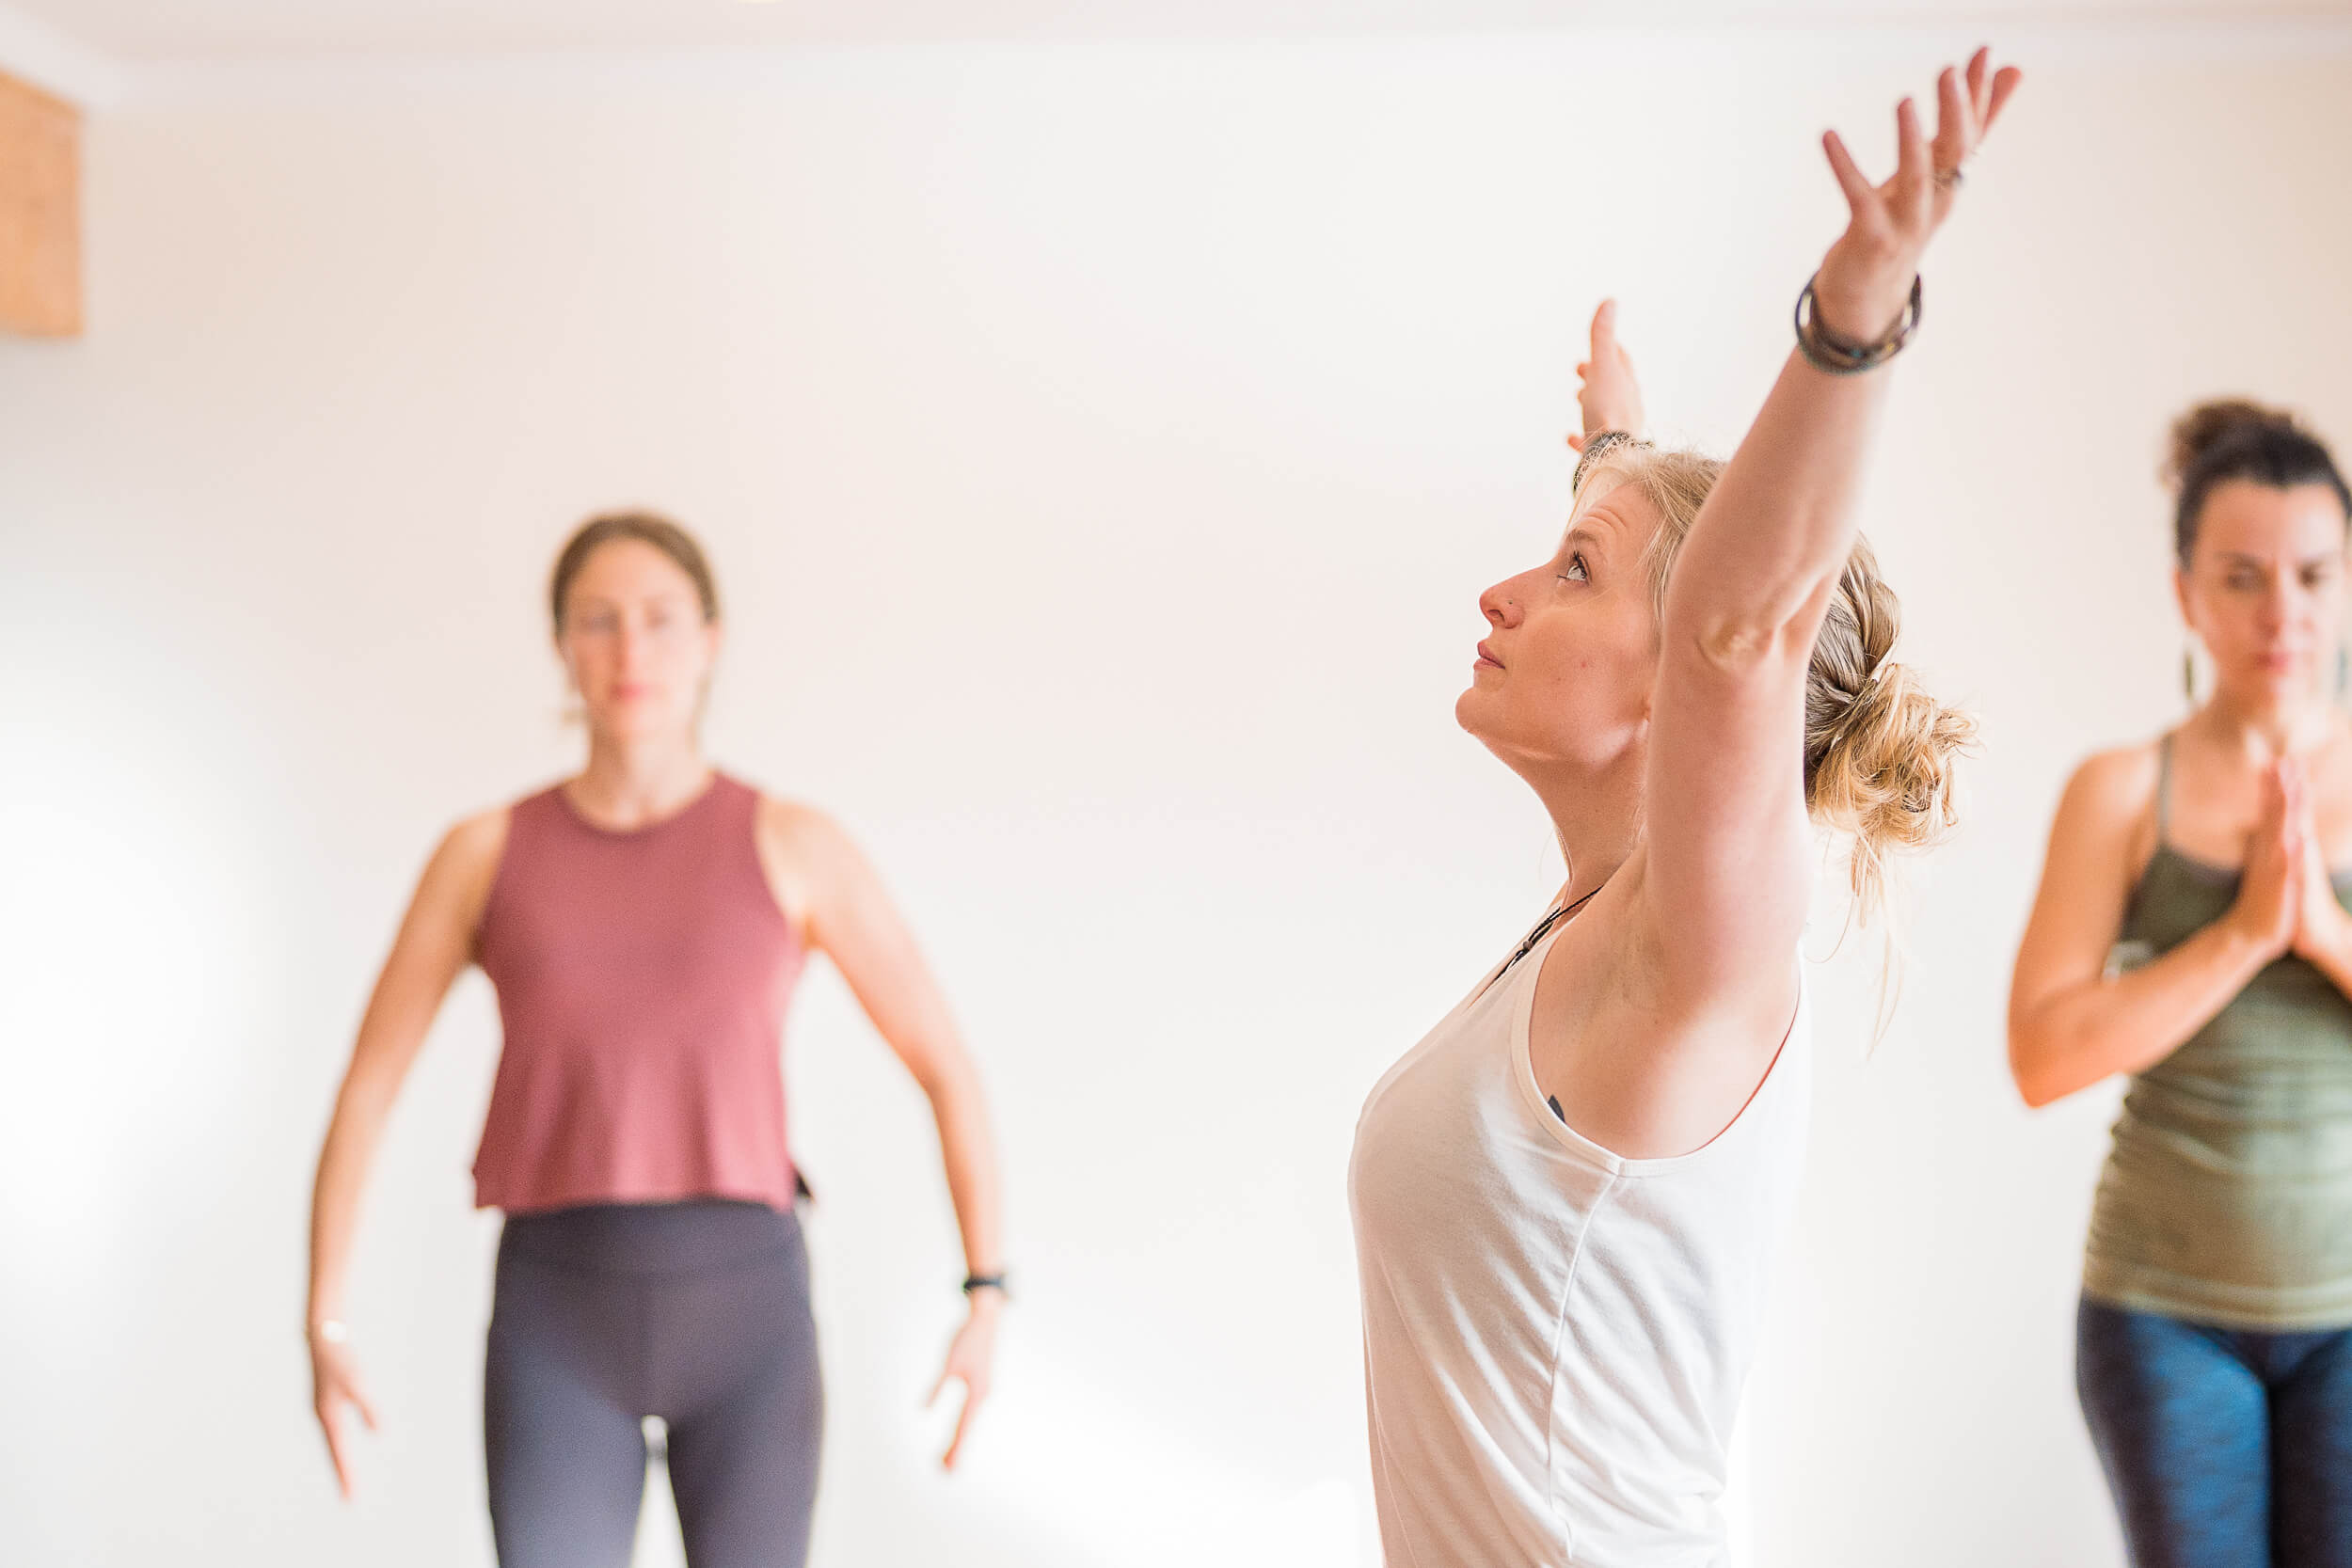 At Shala Yoga in Squamish, a yoga participant is captured in an uplifting pose, with others in the background in a state of centered meditation. The clean, airy space of the studio promotes a serene environment for these individuals to connect with their practice.